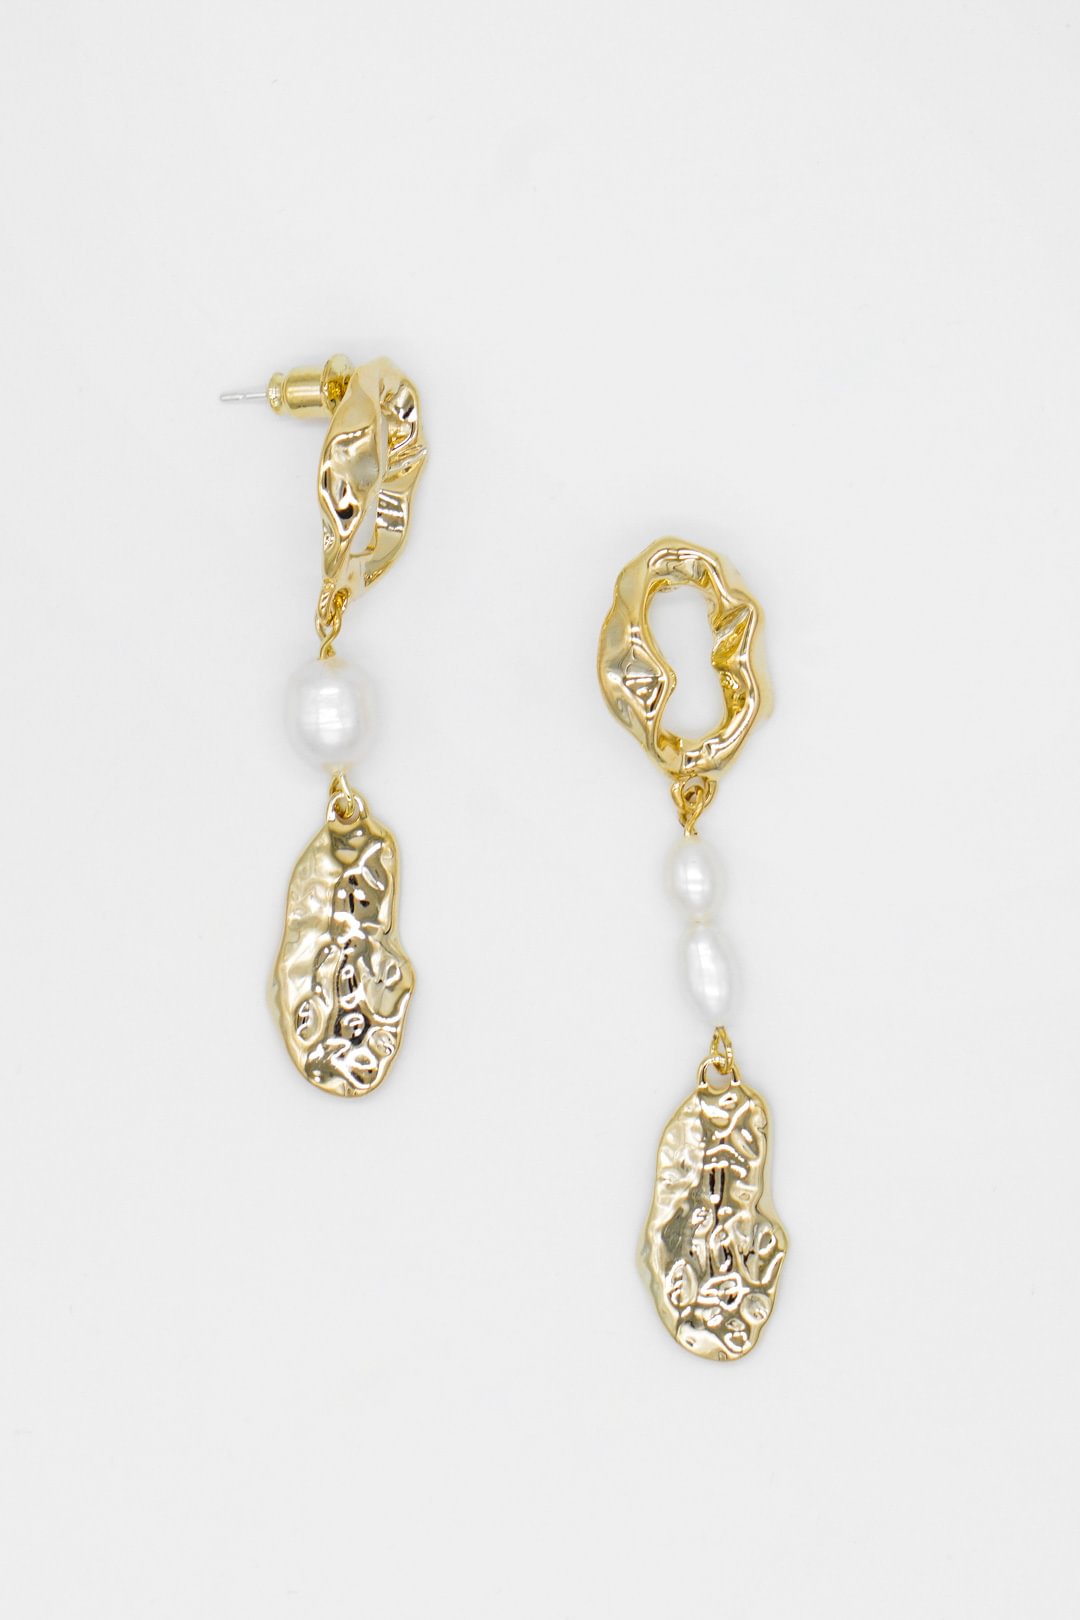 FashionV-FashionV Hoop Earrings  With Drop Pearl And Gold Charms